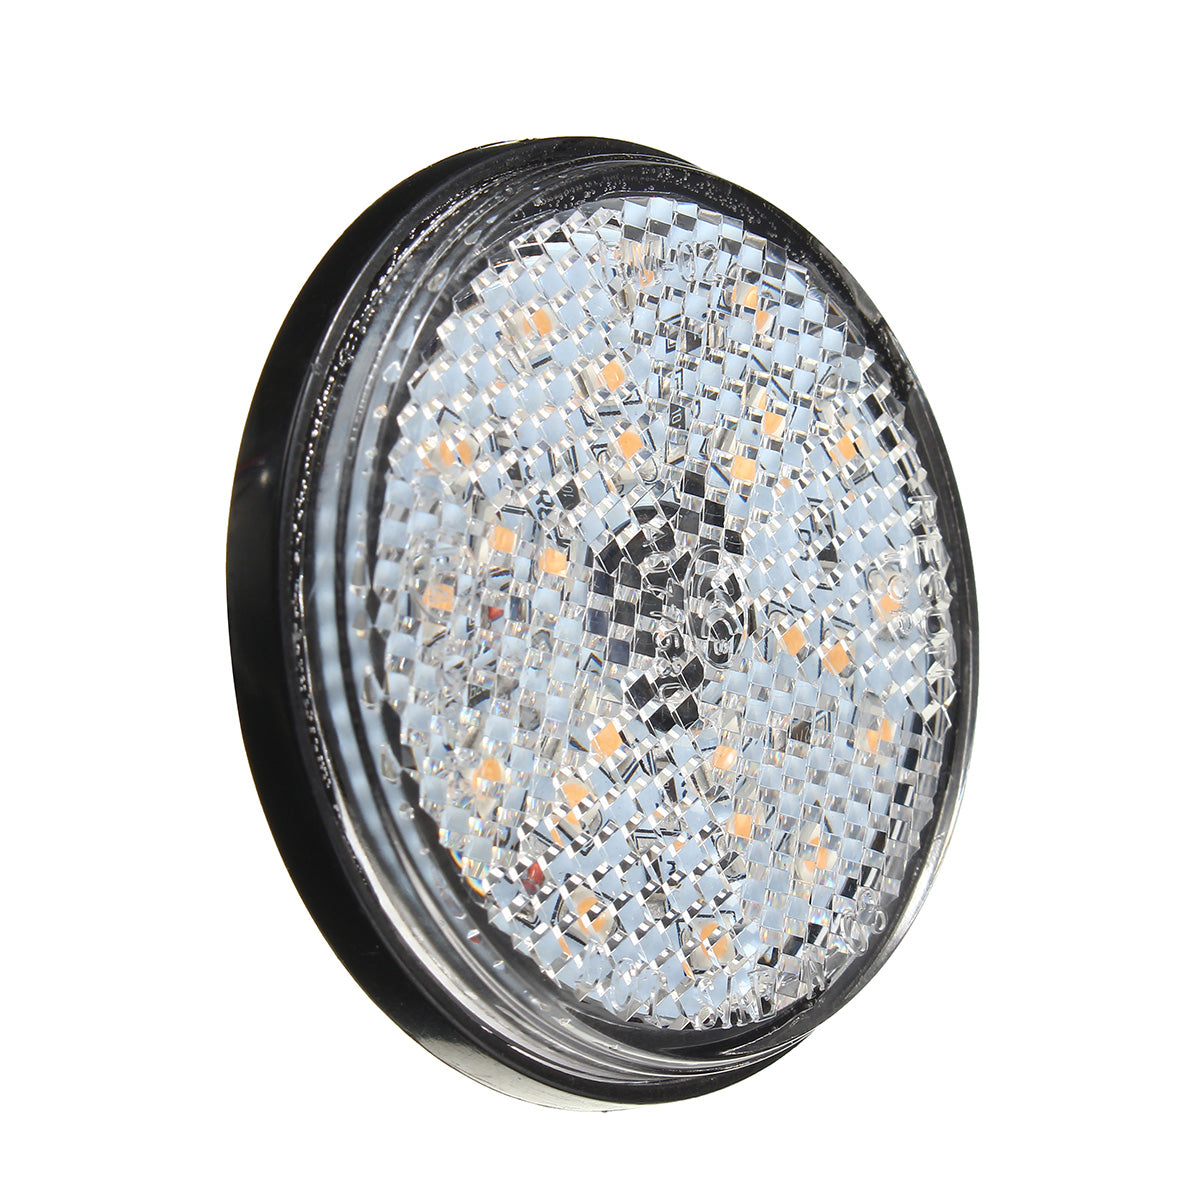 Gray 6W 24LED  Round Reflector LED Rear Taillight Brake Stop Light For Motorcycle 7 Colors